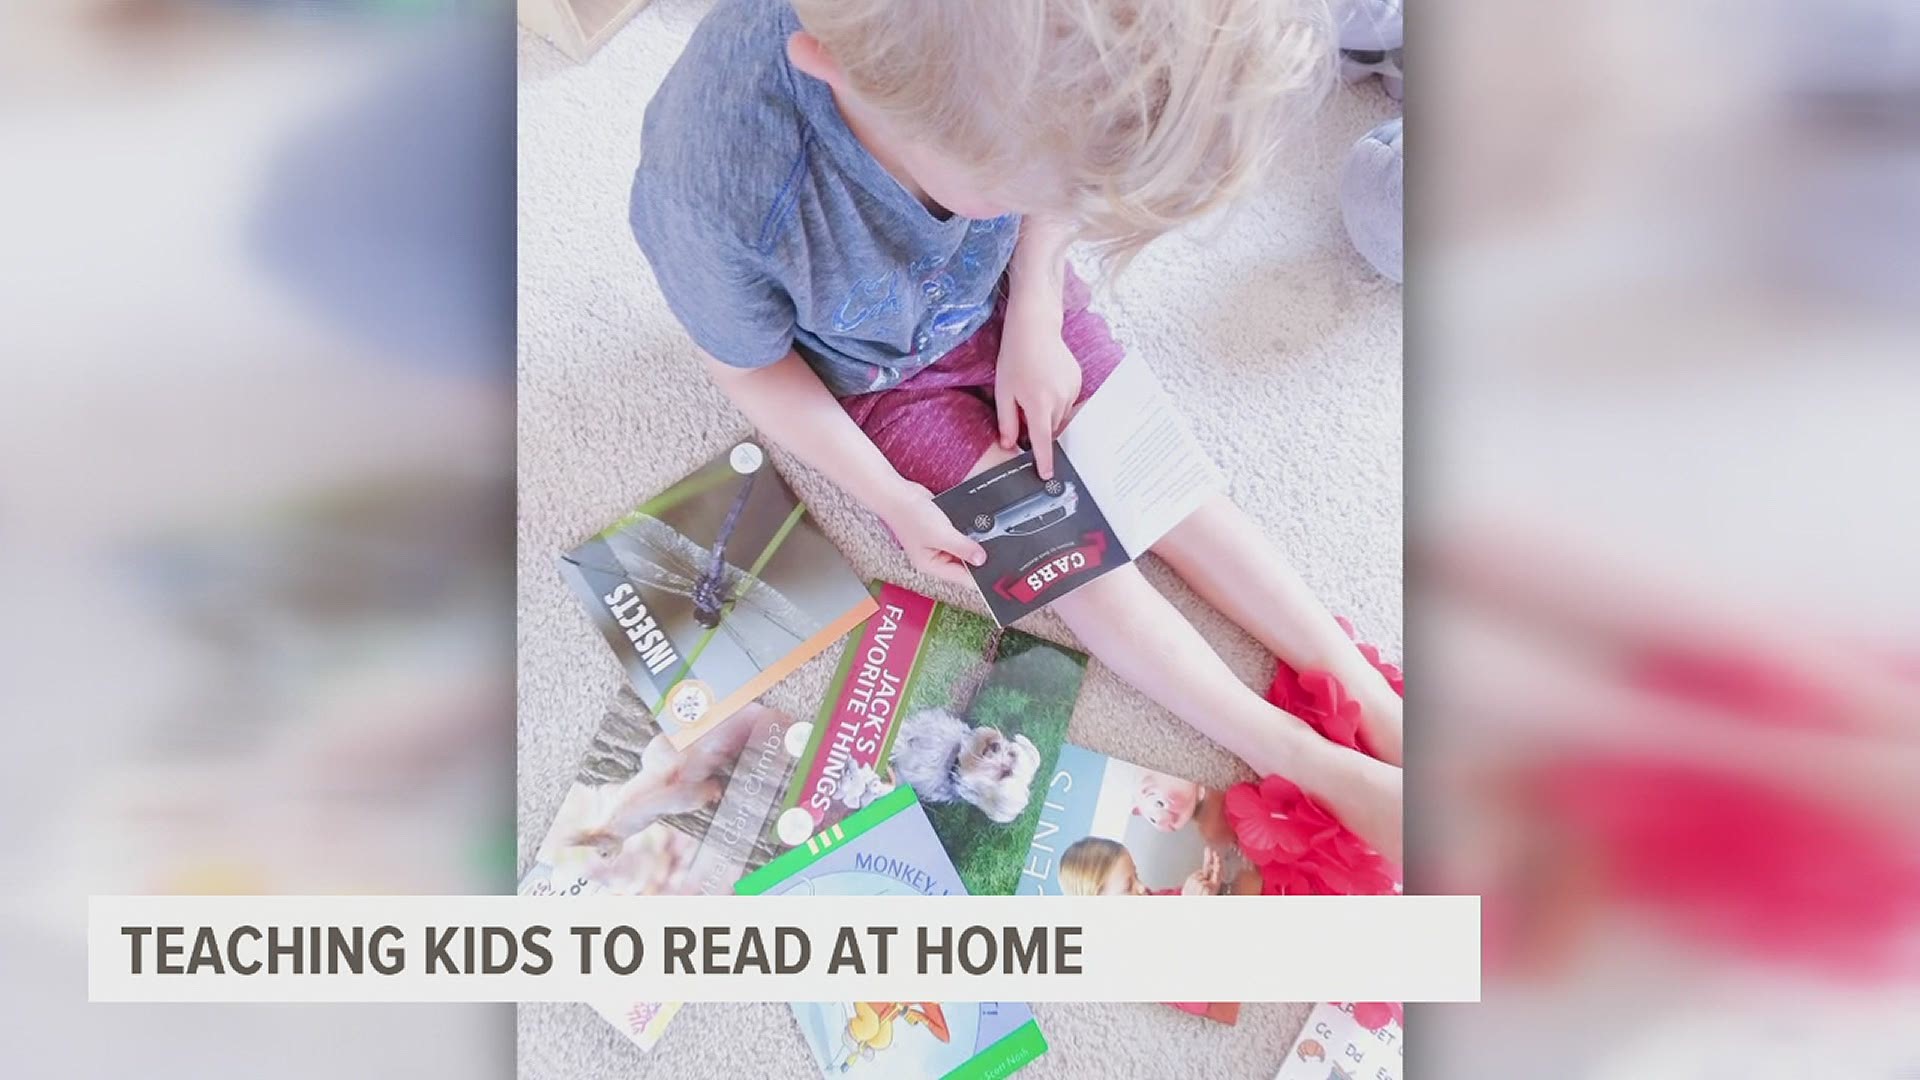 FOX43's Amy Lutz discusses fun, easy ways parents can get their kids to read with advice from the CEO of Just Right Reader.